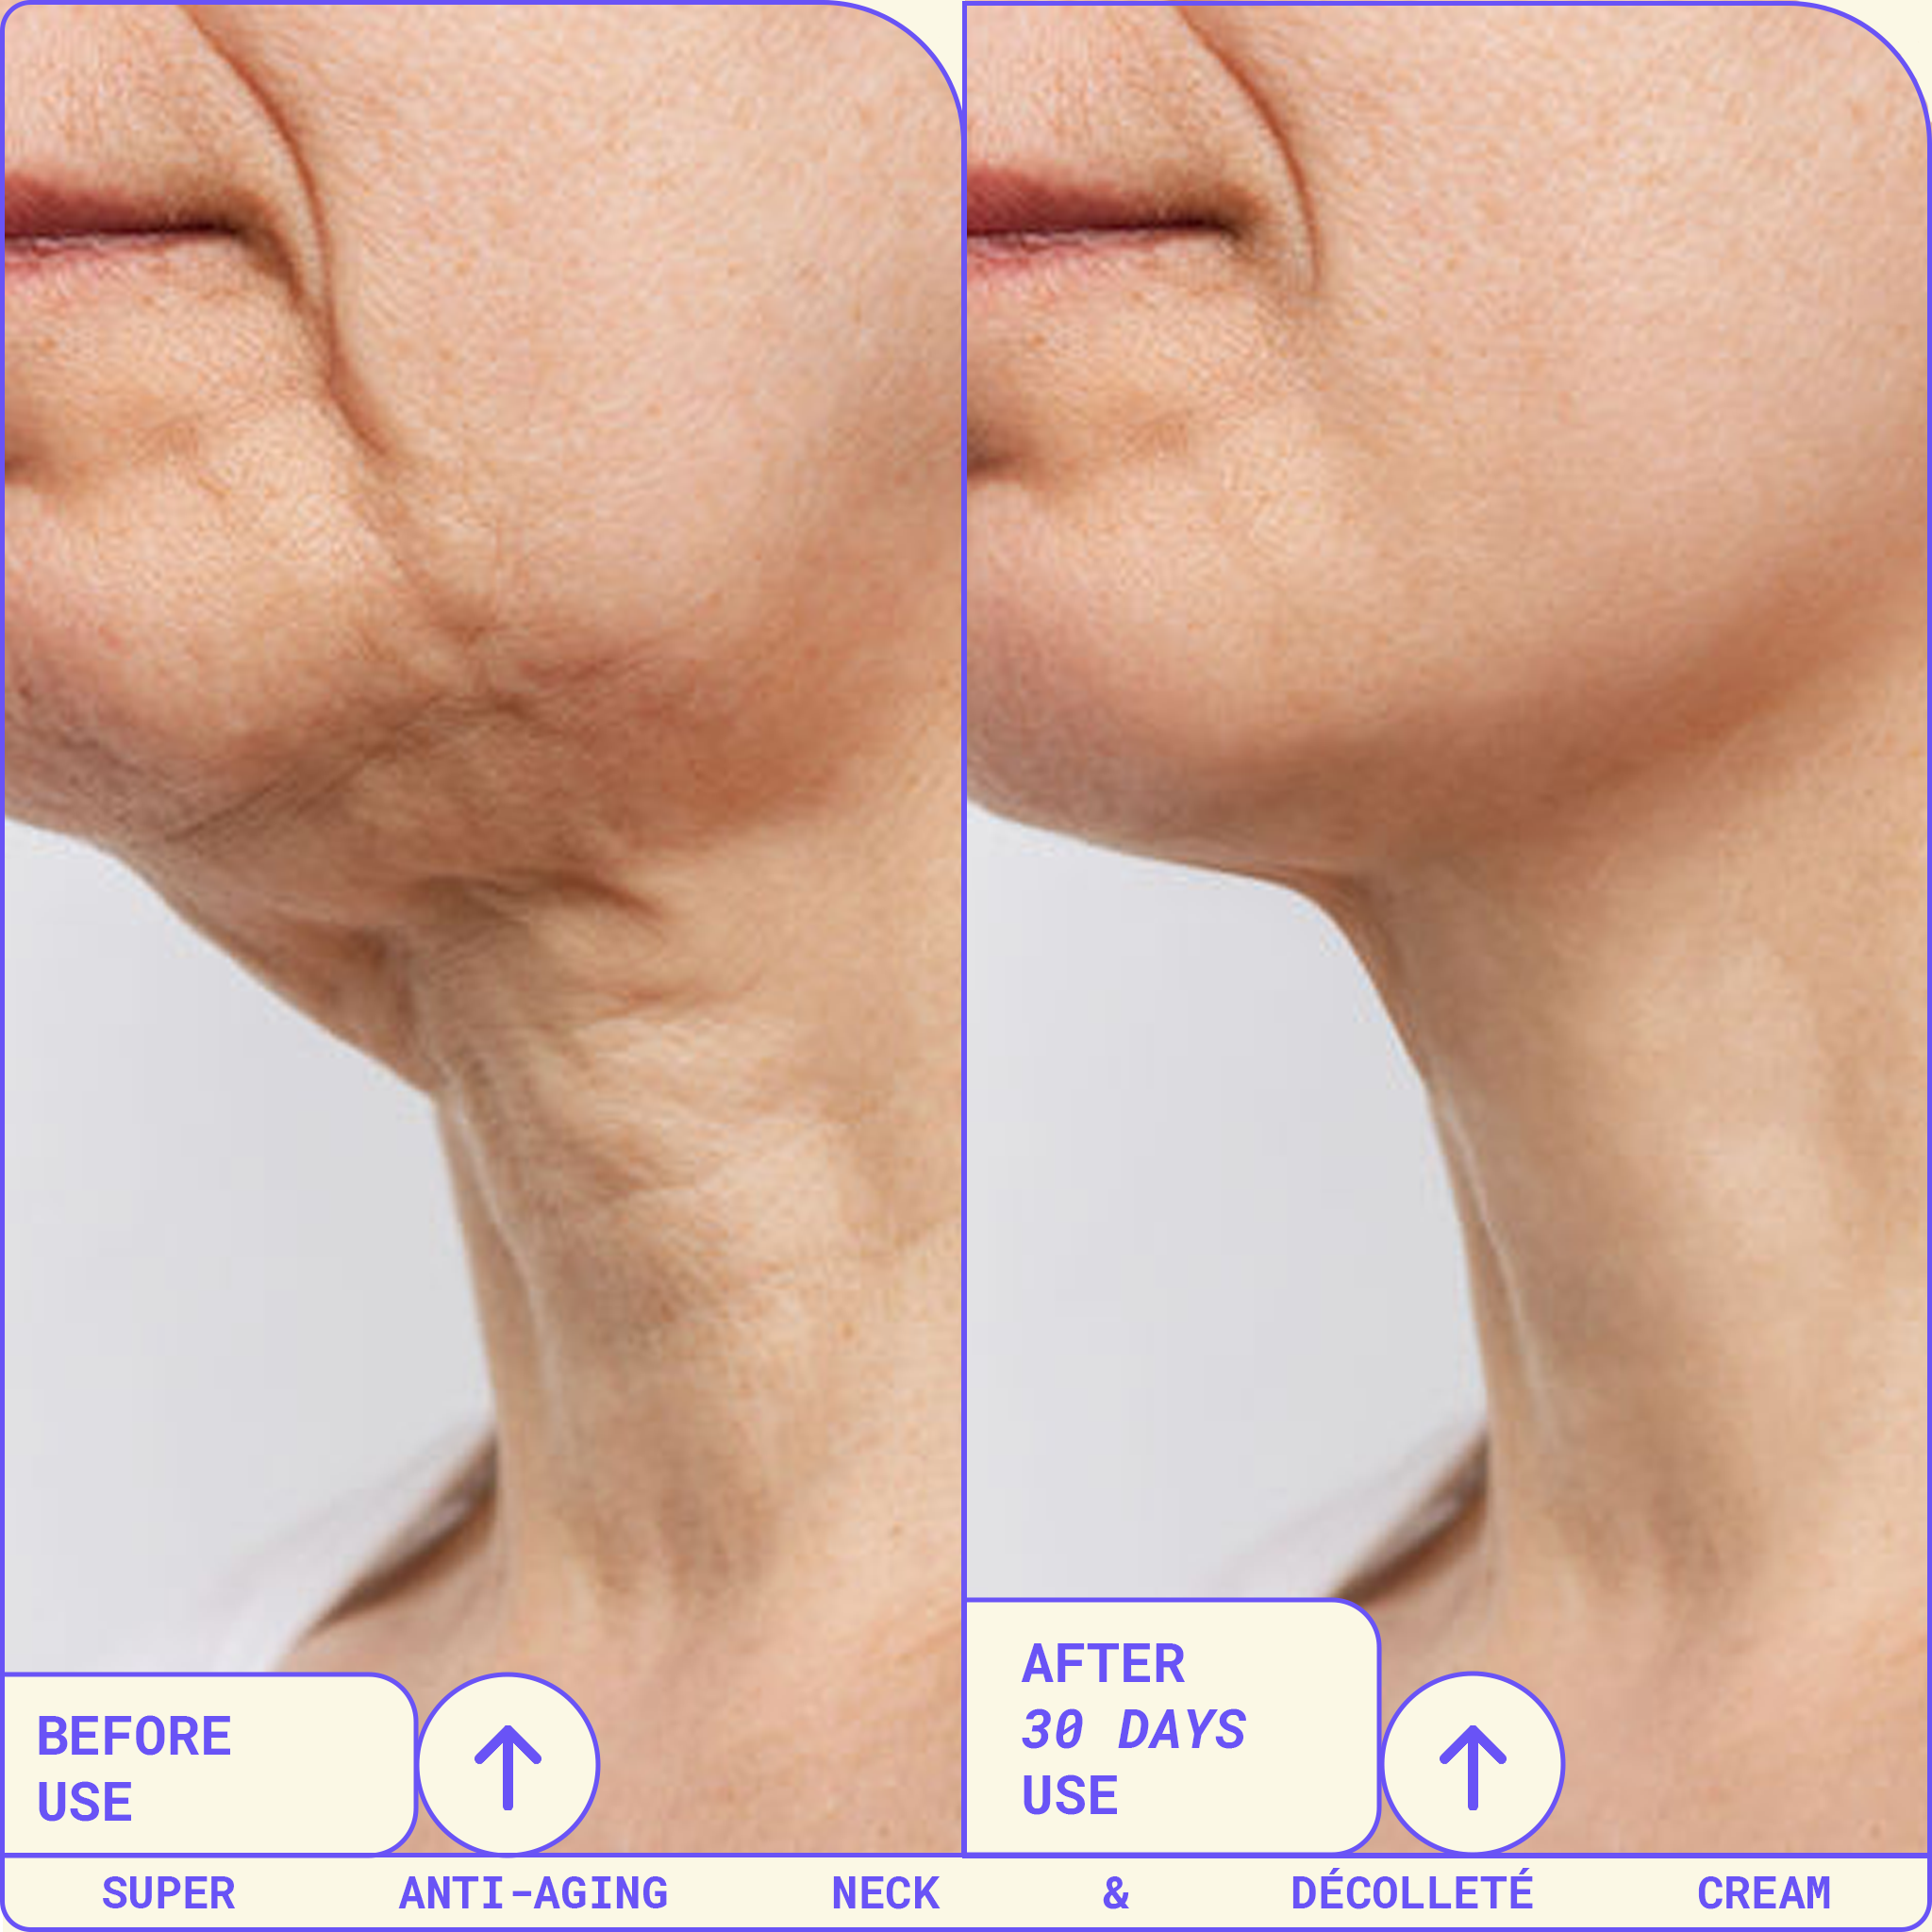 Neckbefore_after_d9ca6445-0b6a-464f-a66f-738be8889b02.png